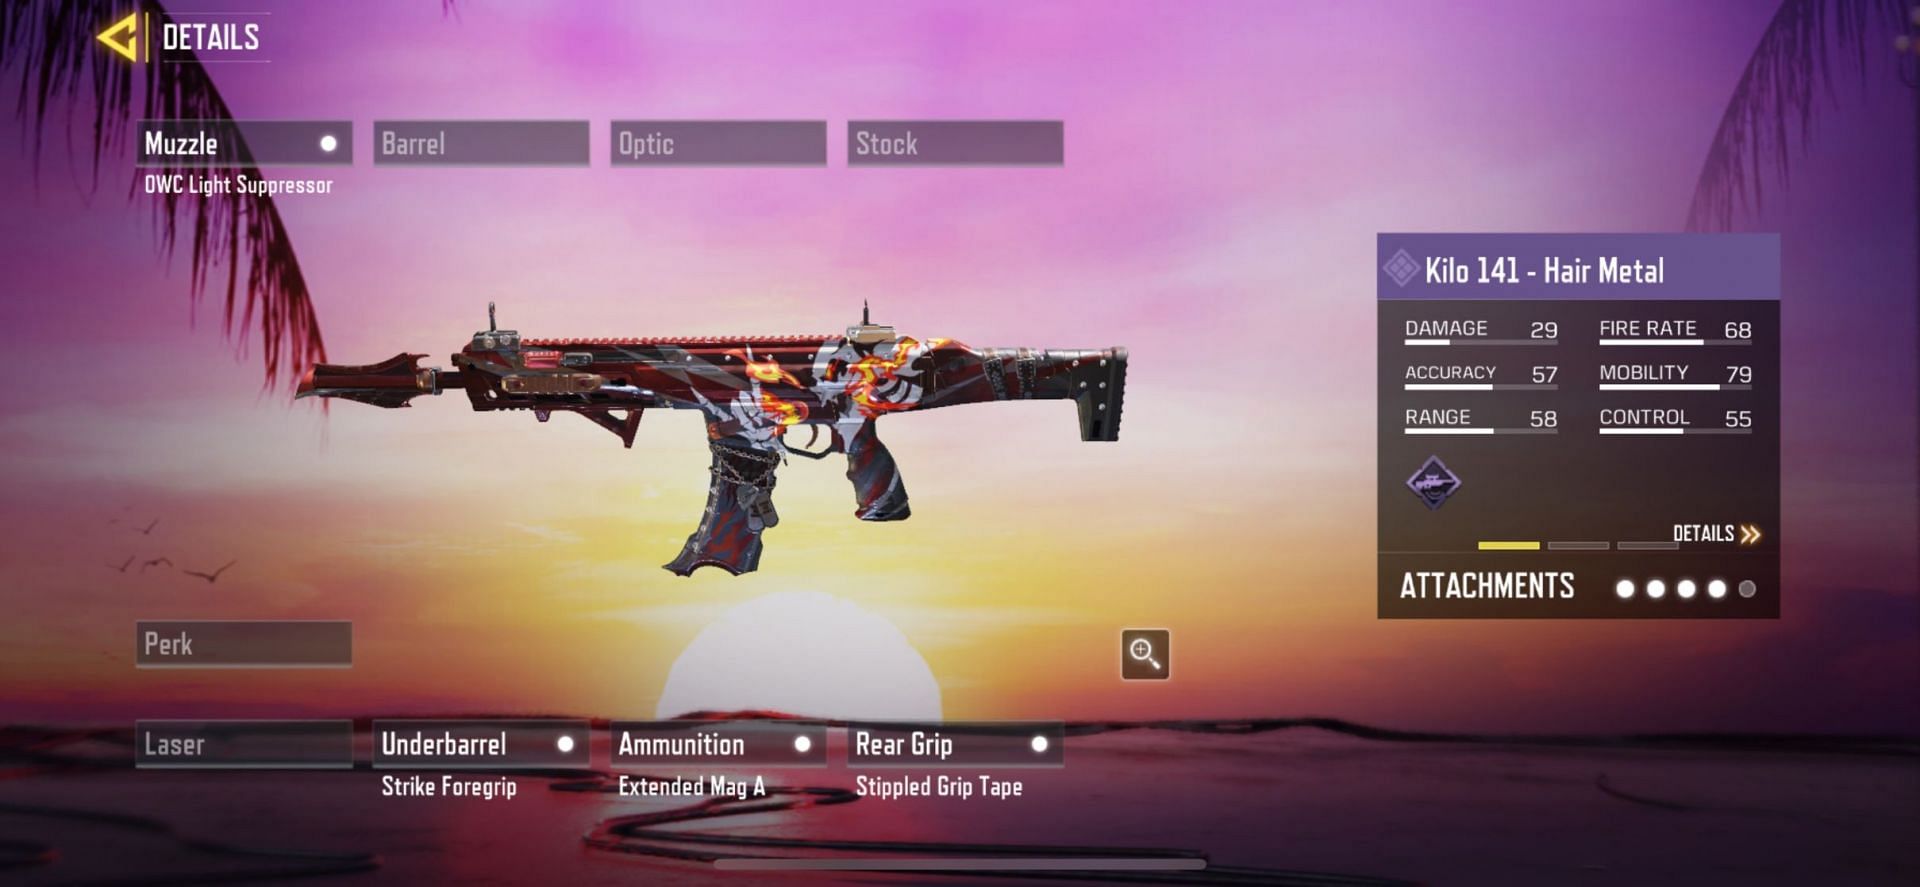 The Kilo 141 - Hair Metal skin allows players to appreciate the music of the 80s by adding a little metal flair to the weapon (Image via Activision)